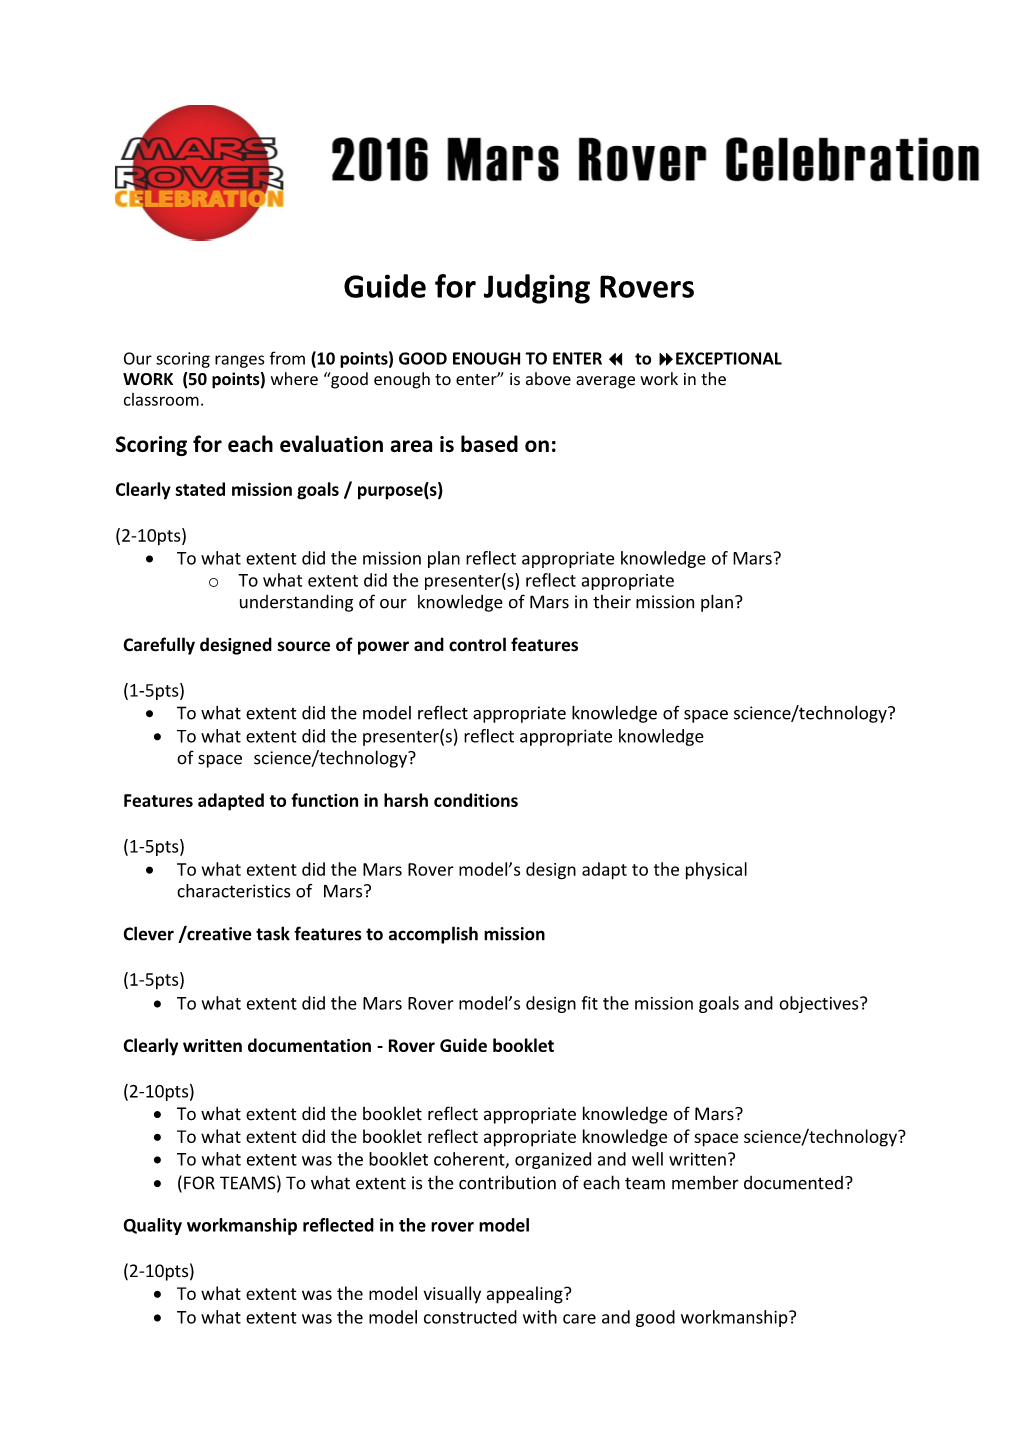 Guide for Judging Rovers